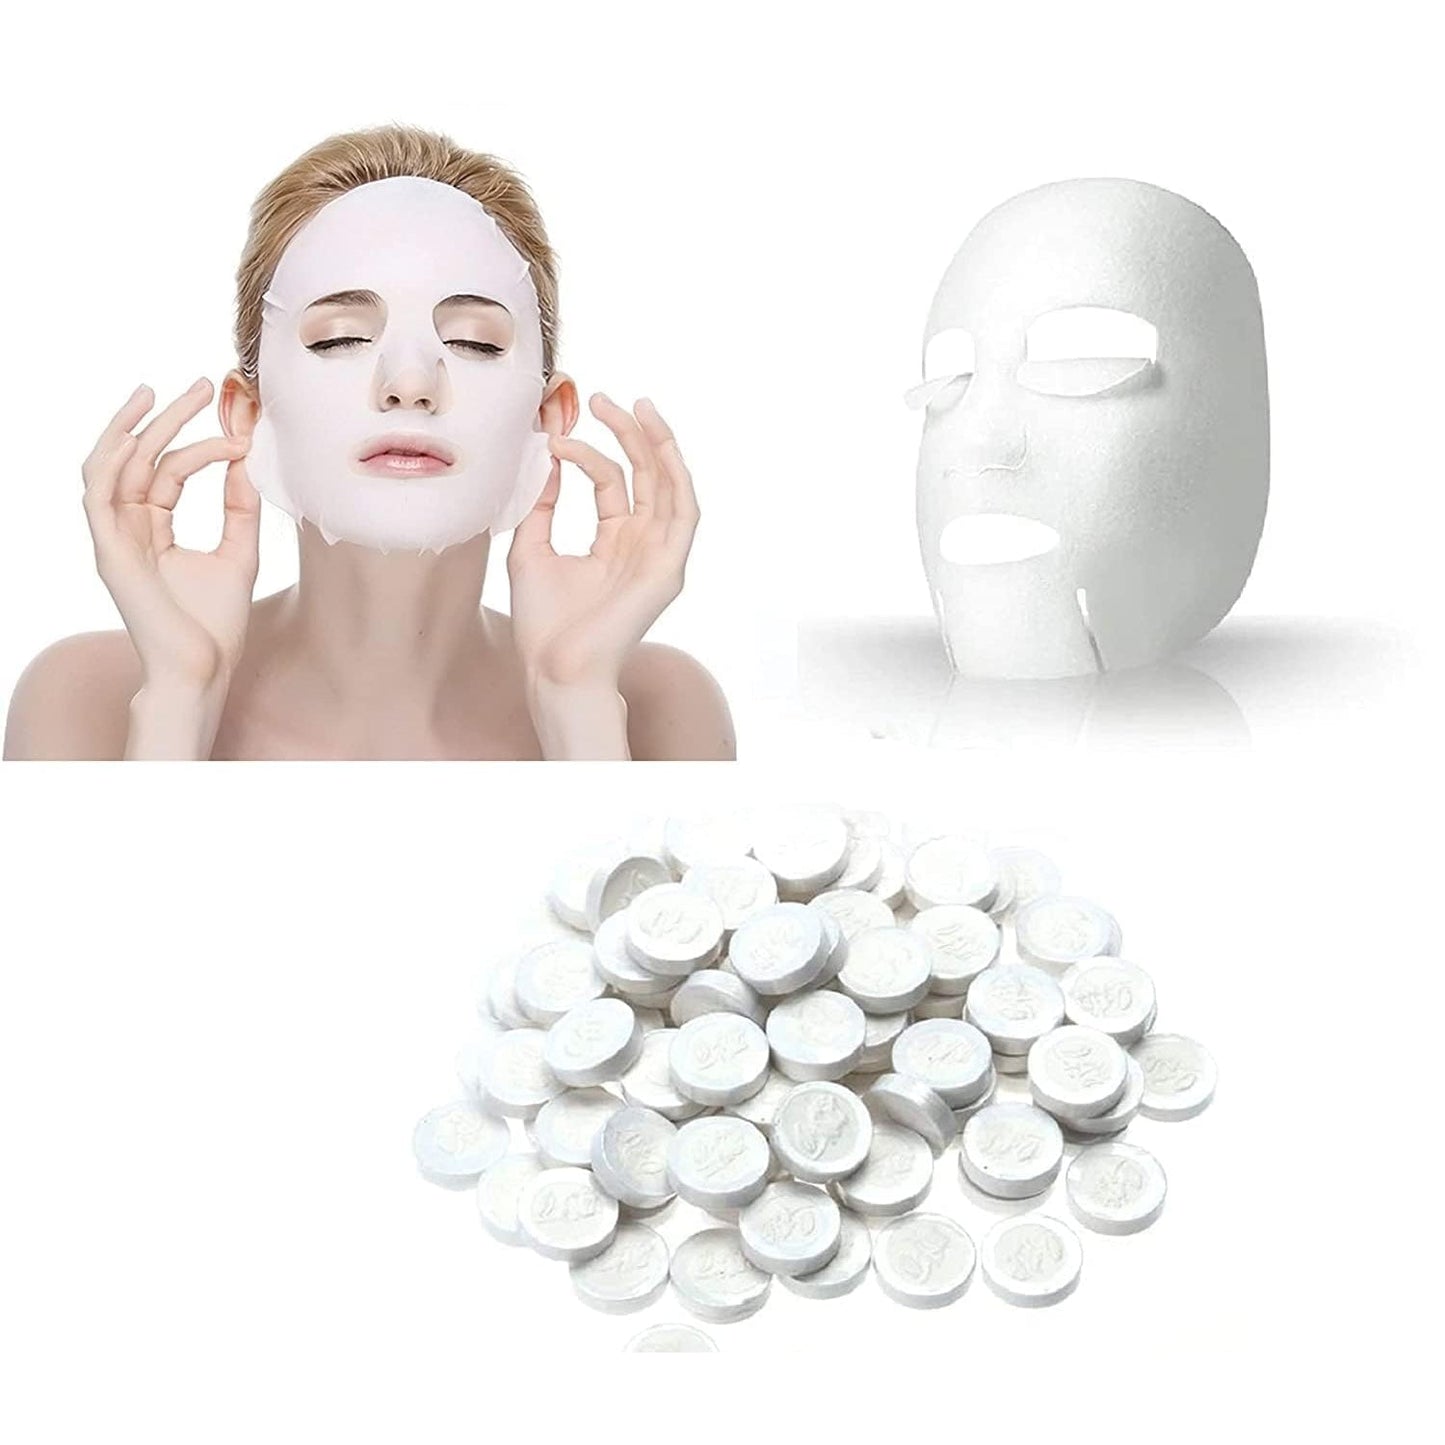 6144 Facial Lotion Tissue Paper DIY Home Spa Coin Face Mask/ Compressed Facial Whitening Tablet Face Mask Sheet for Women and Girl - Pack of 100 DeoDap